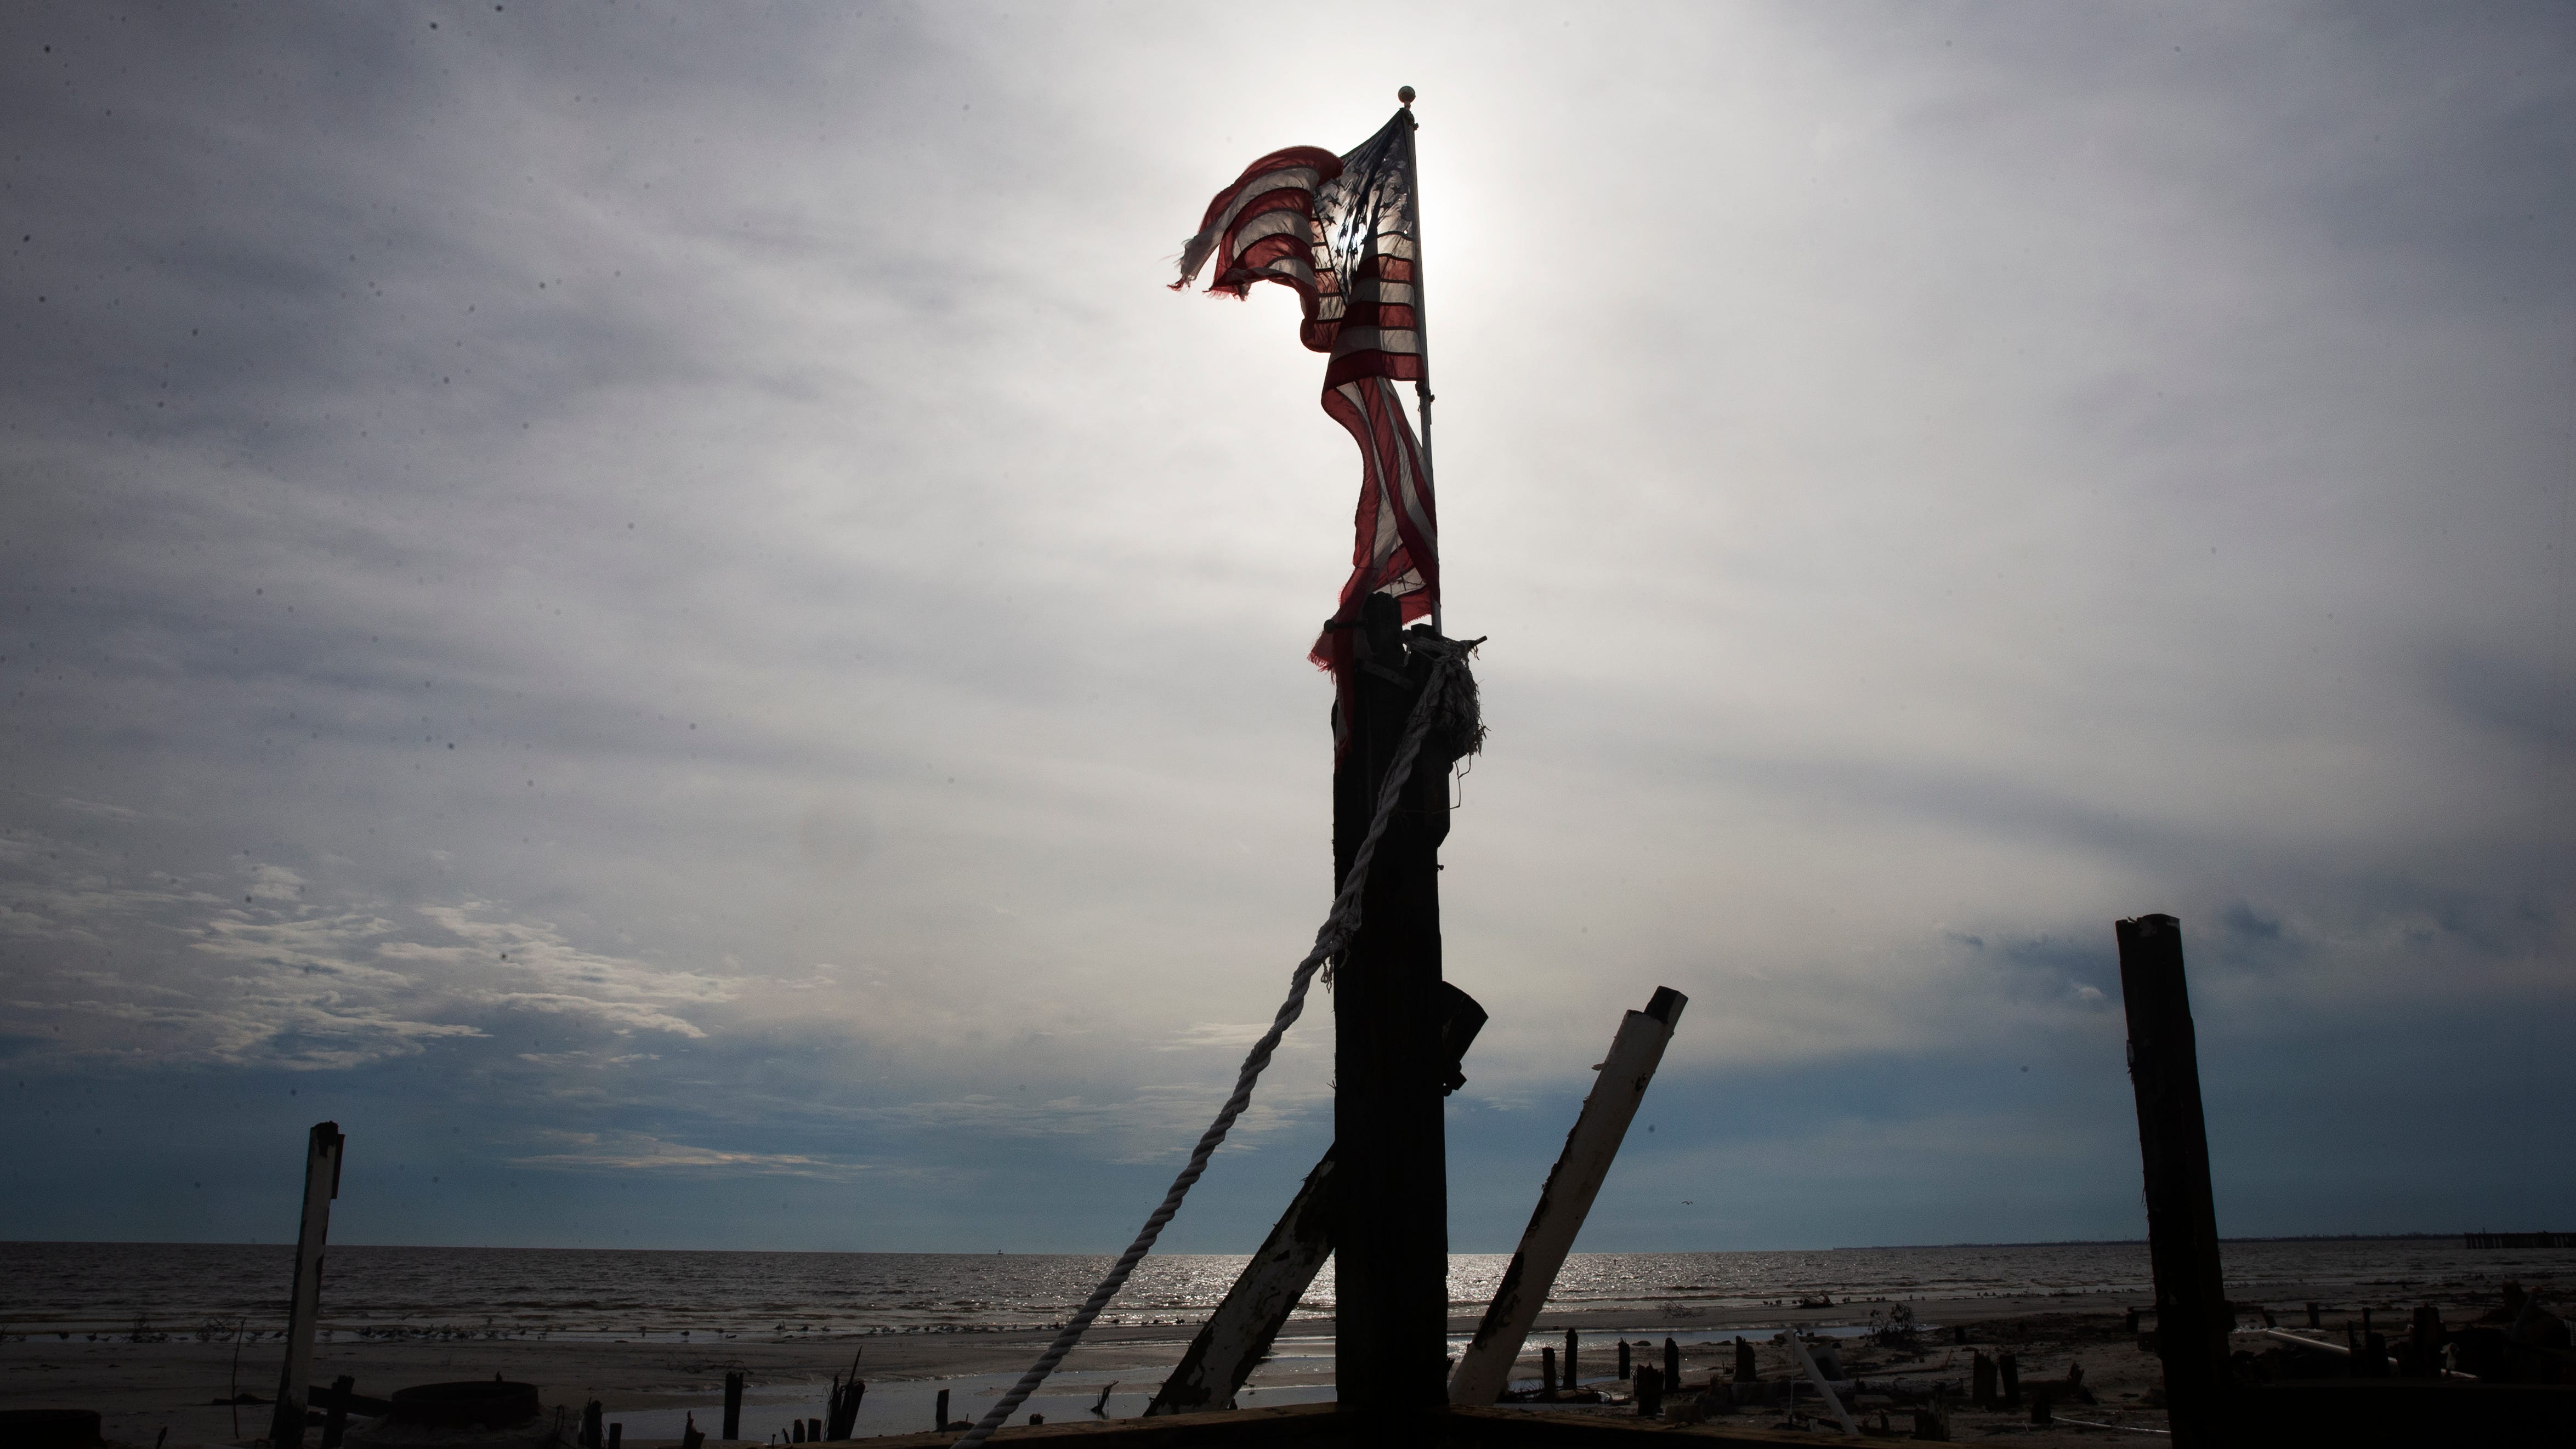 The Cottage Bar at Shuckers on Fort Myers Beach was destroyed  in Hurricane Ian.  An American flag was placed on one of the pilings that remain.  